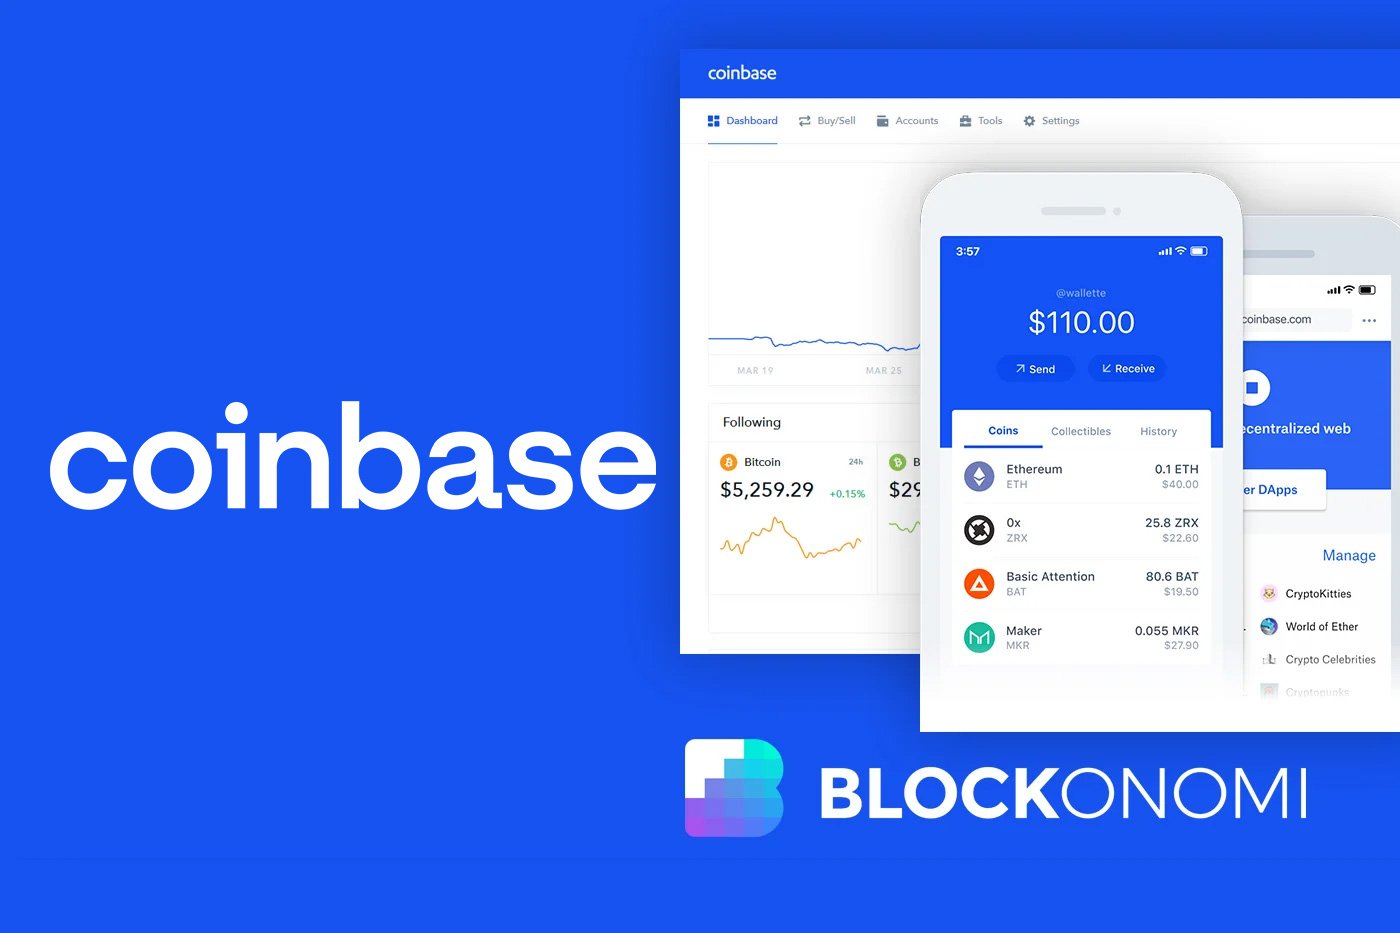 How to Open a Coinbase Business Account?